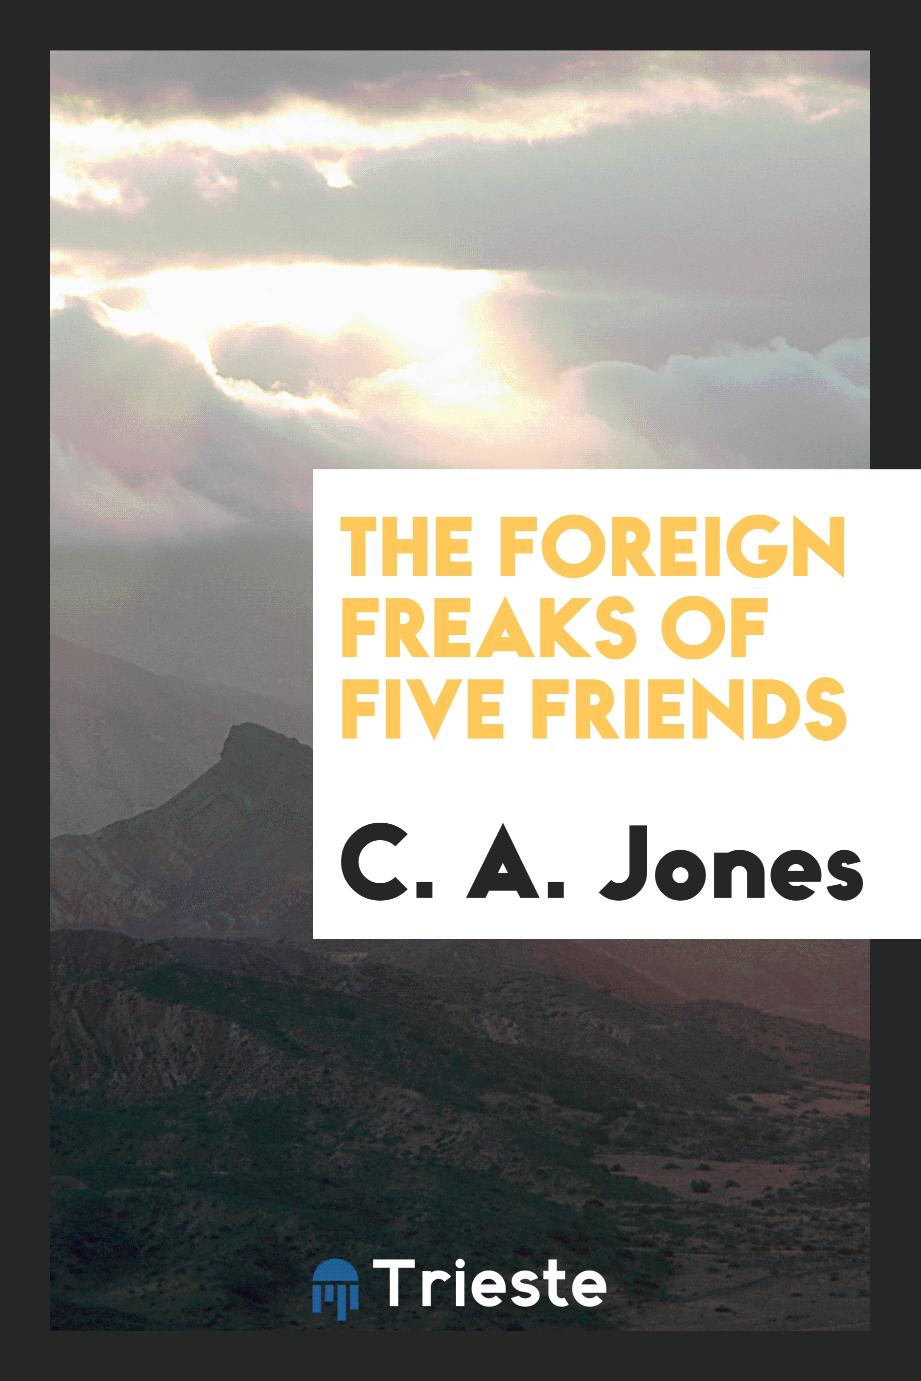 The Foreign Freaks of Five Friends